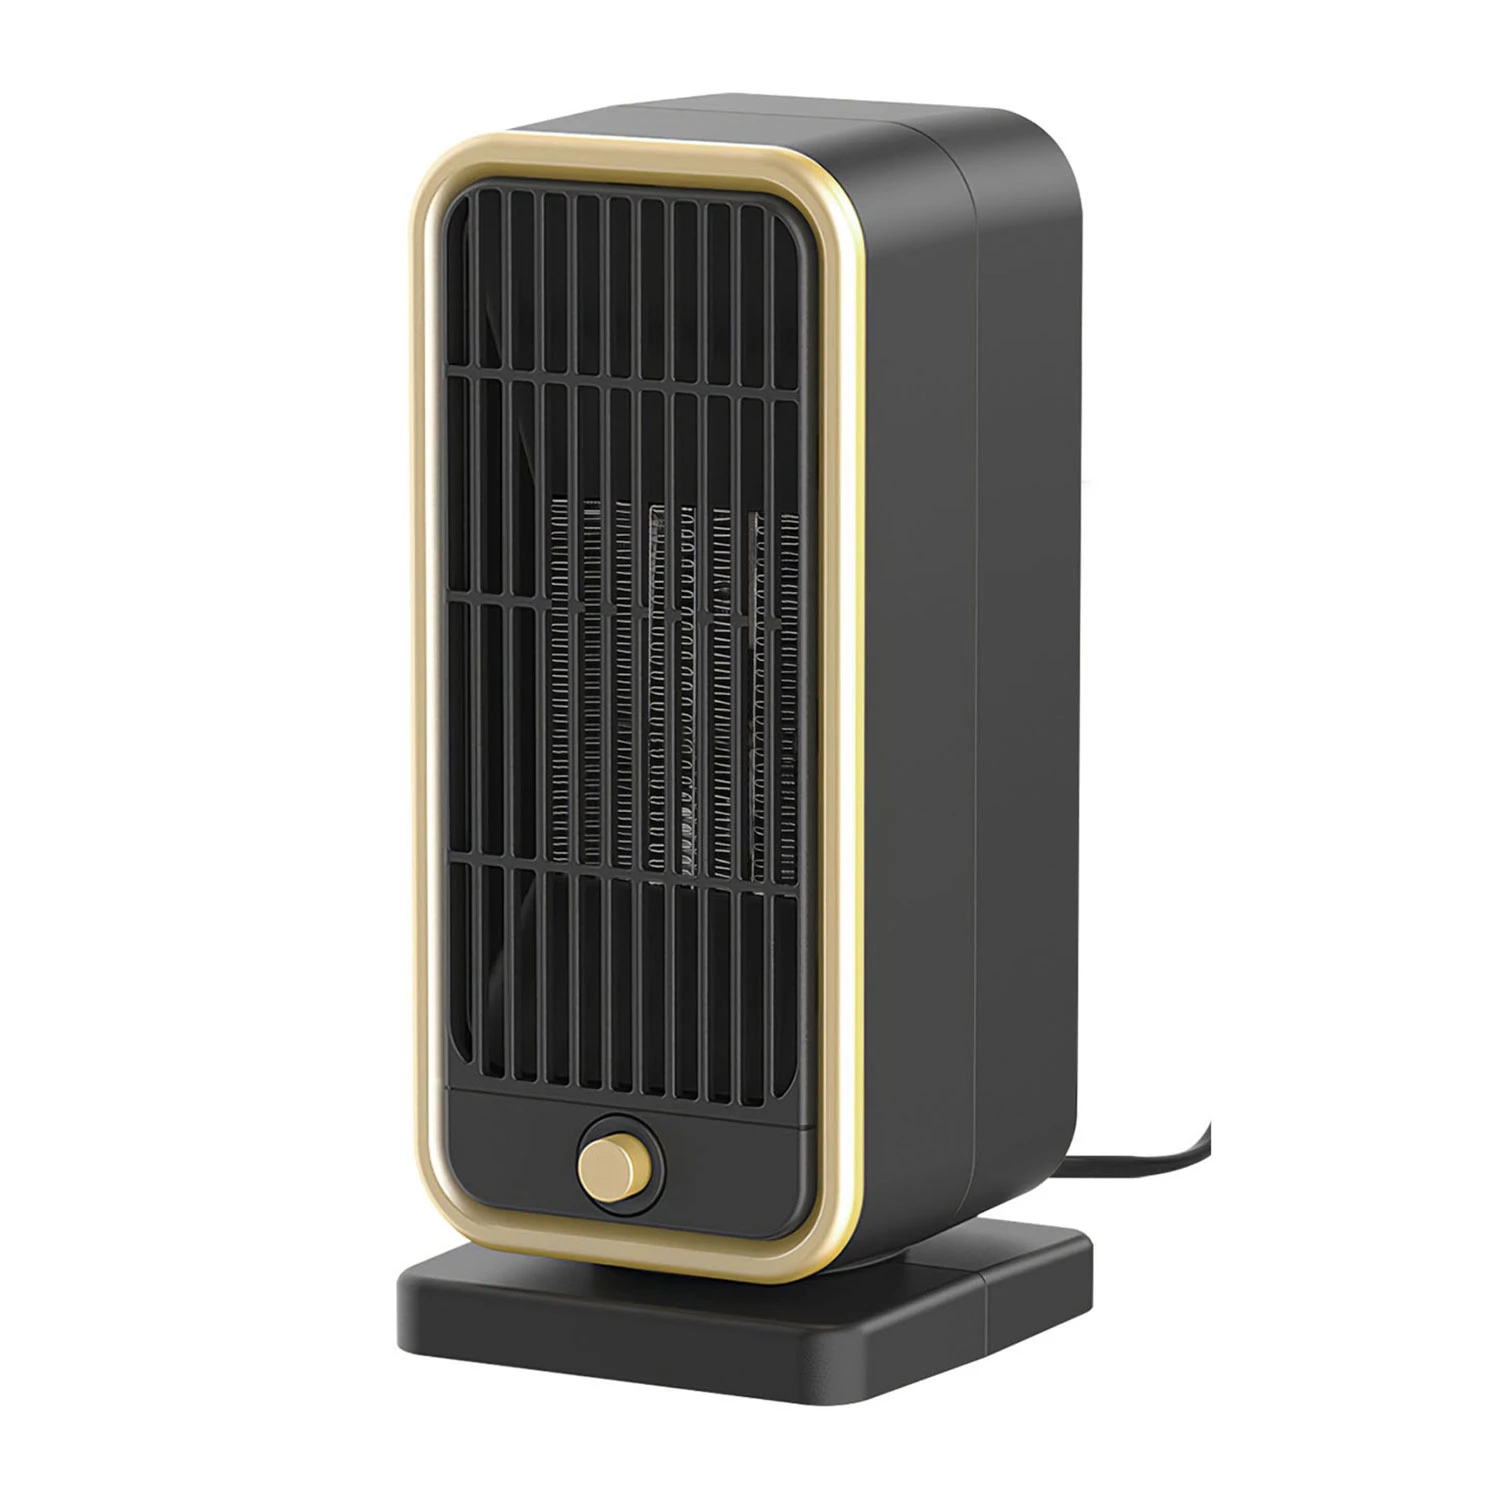 Portable Electric Heater - 500W PTC Ceramic, Overheating Protection, Tip Over Safety, 3S Heating - I